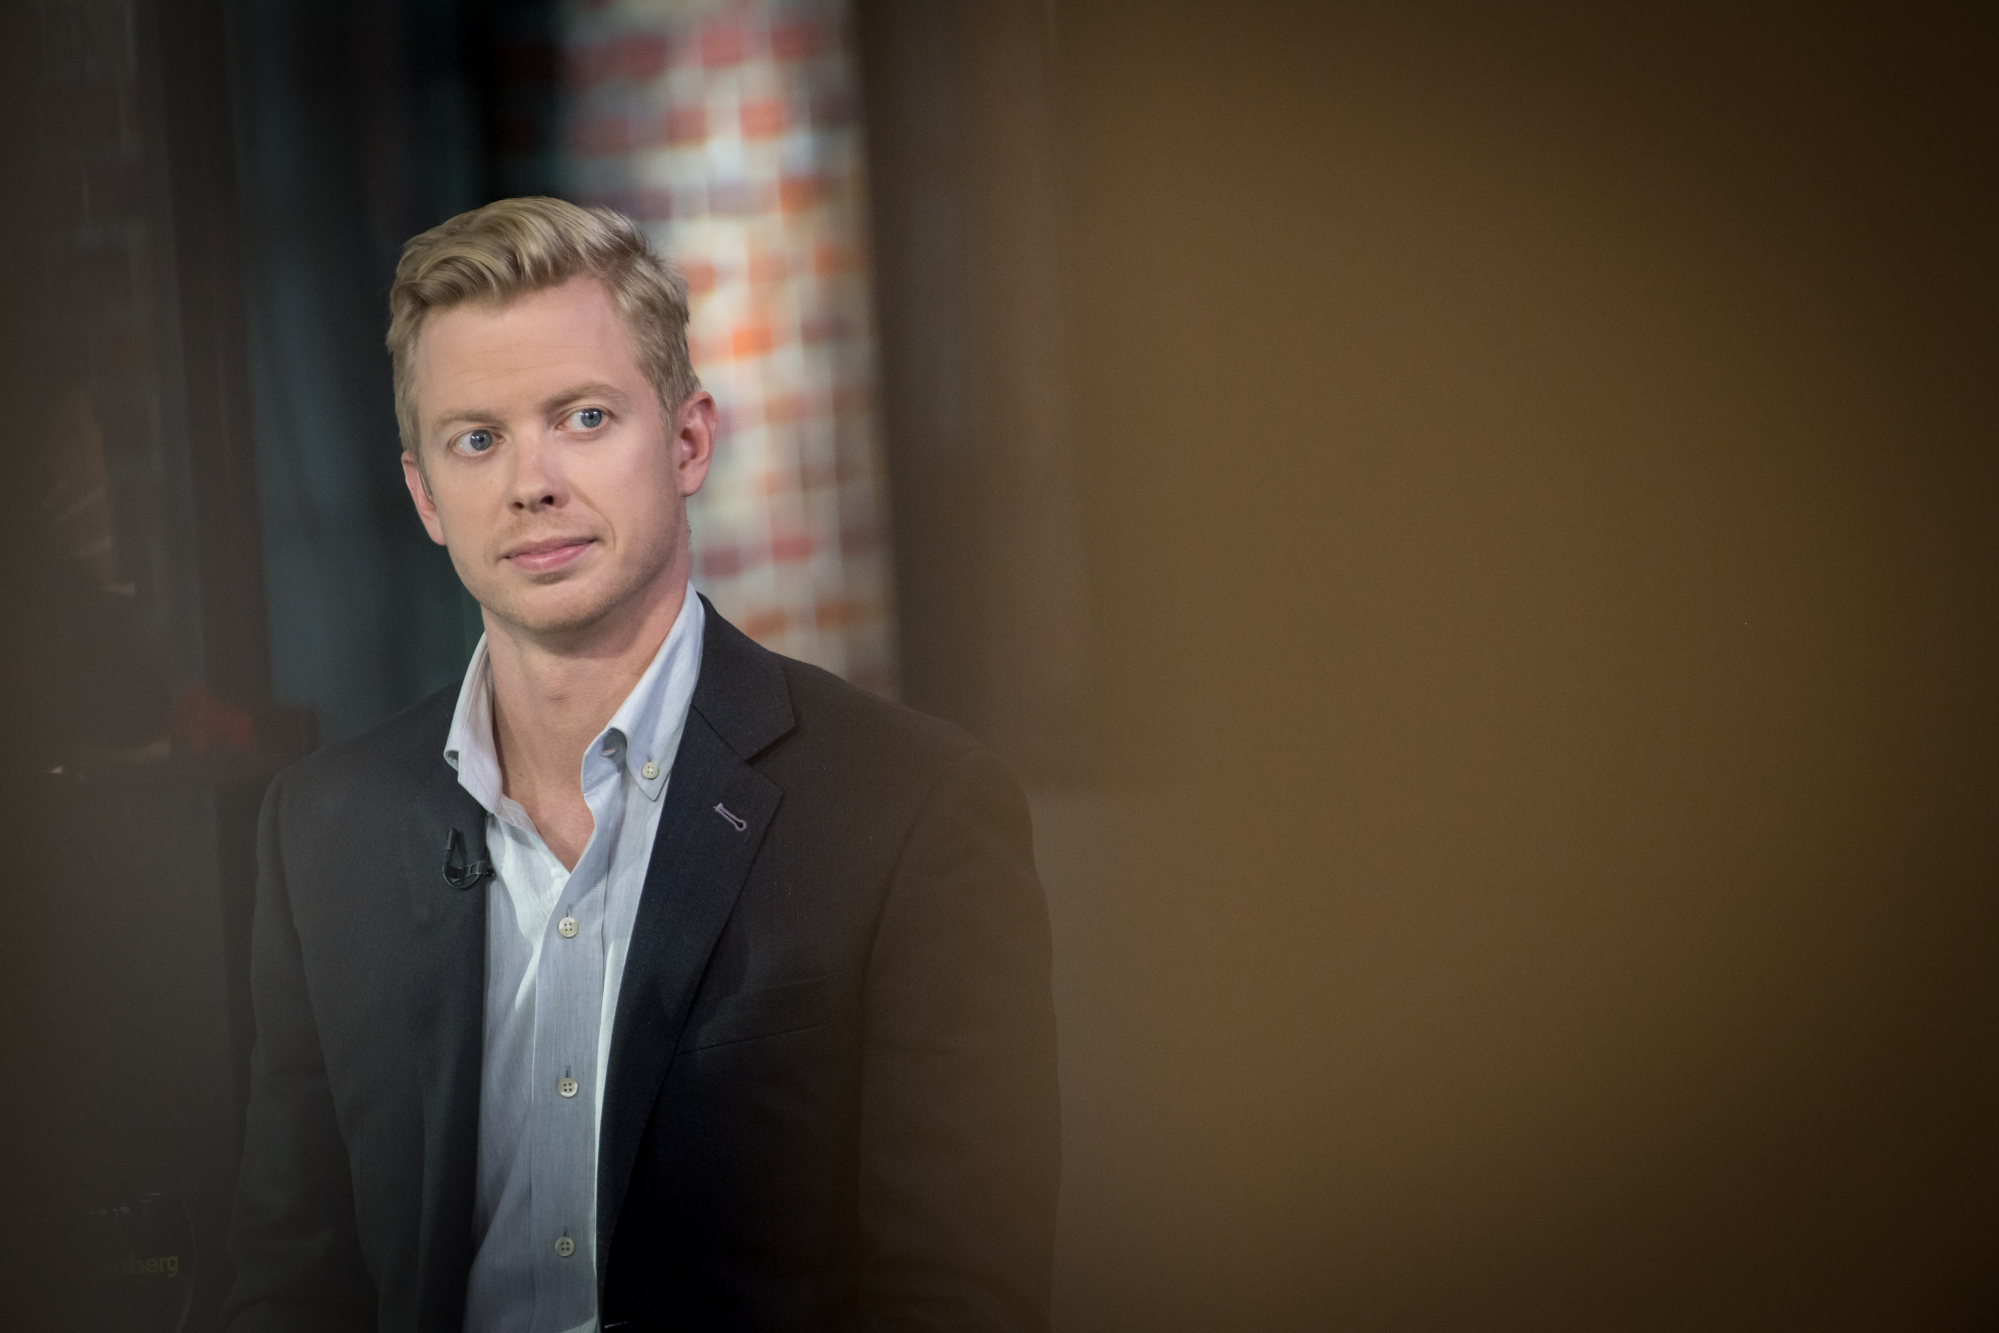 Reddit Inc. Chief Executive Officer Steve Huffman Interview